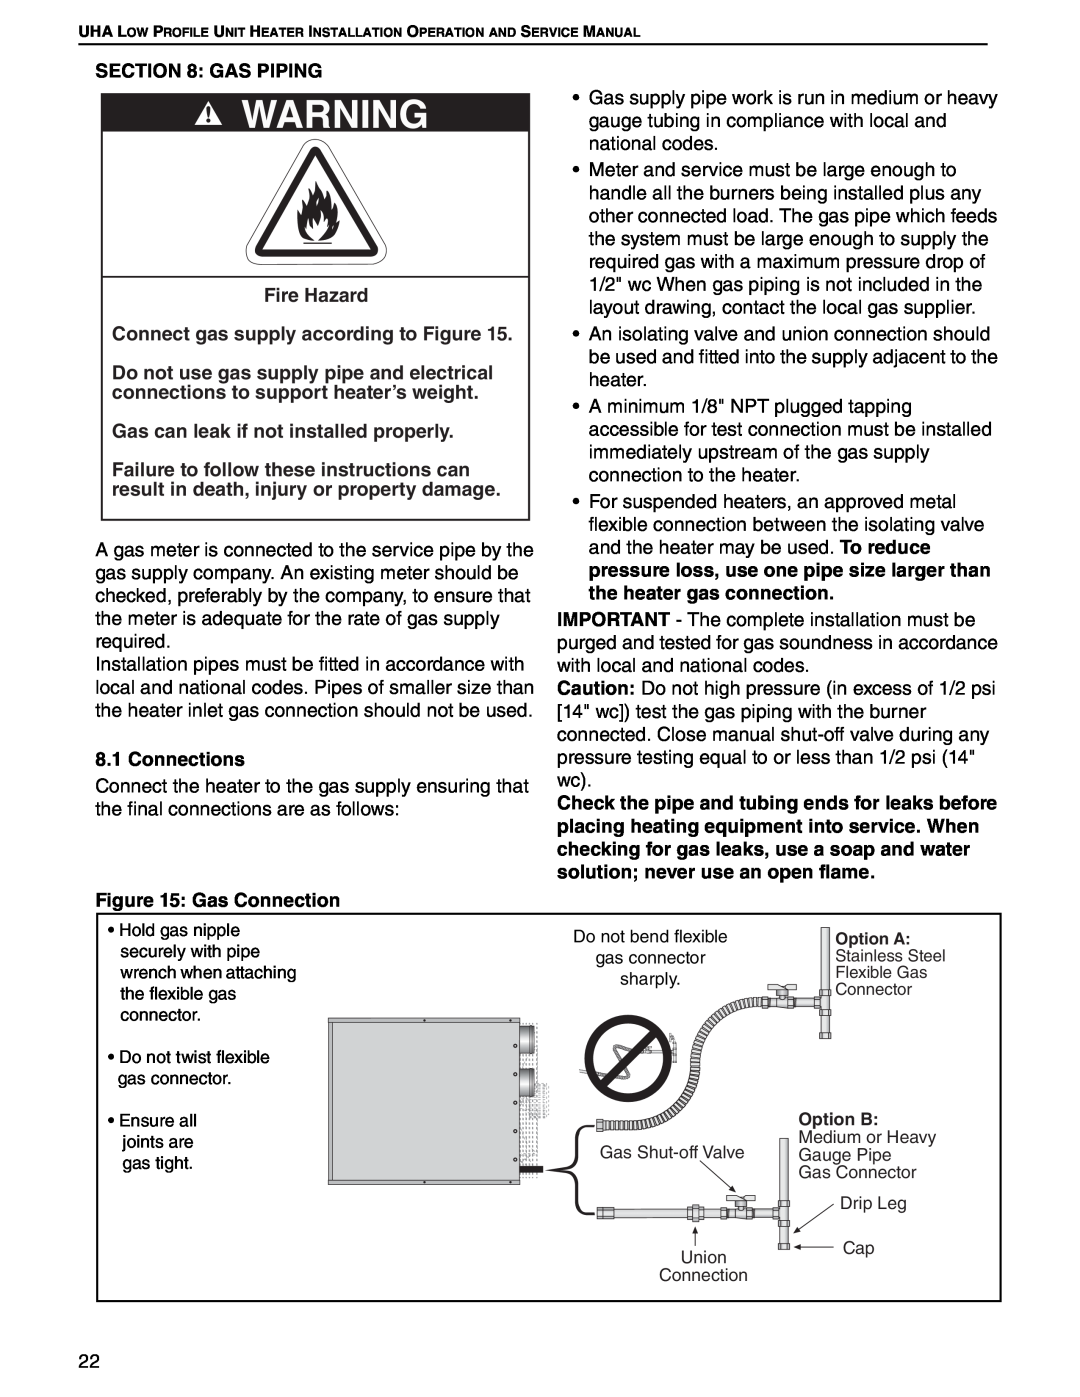 Roberts Gorden 30, 75, 100, 125, 45, 60 service manual Gas Piping, Connections, Gas Connection 